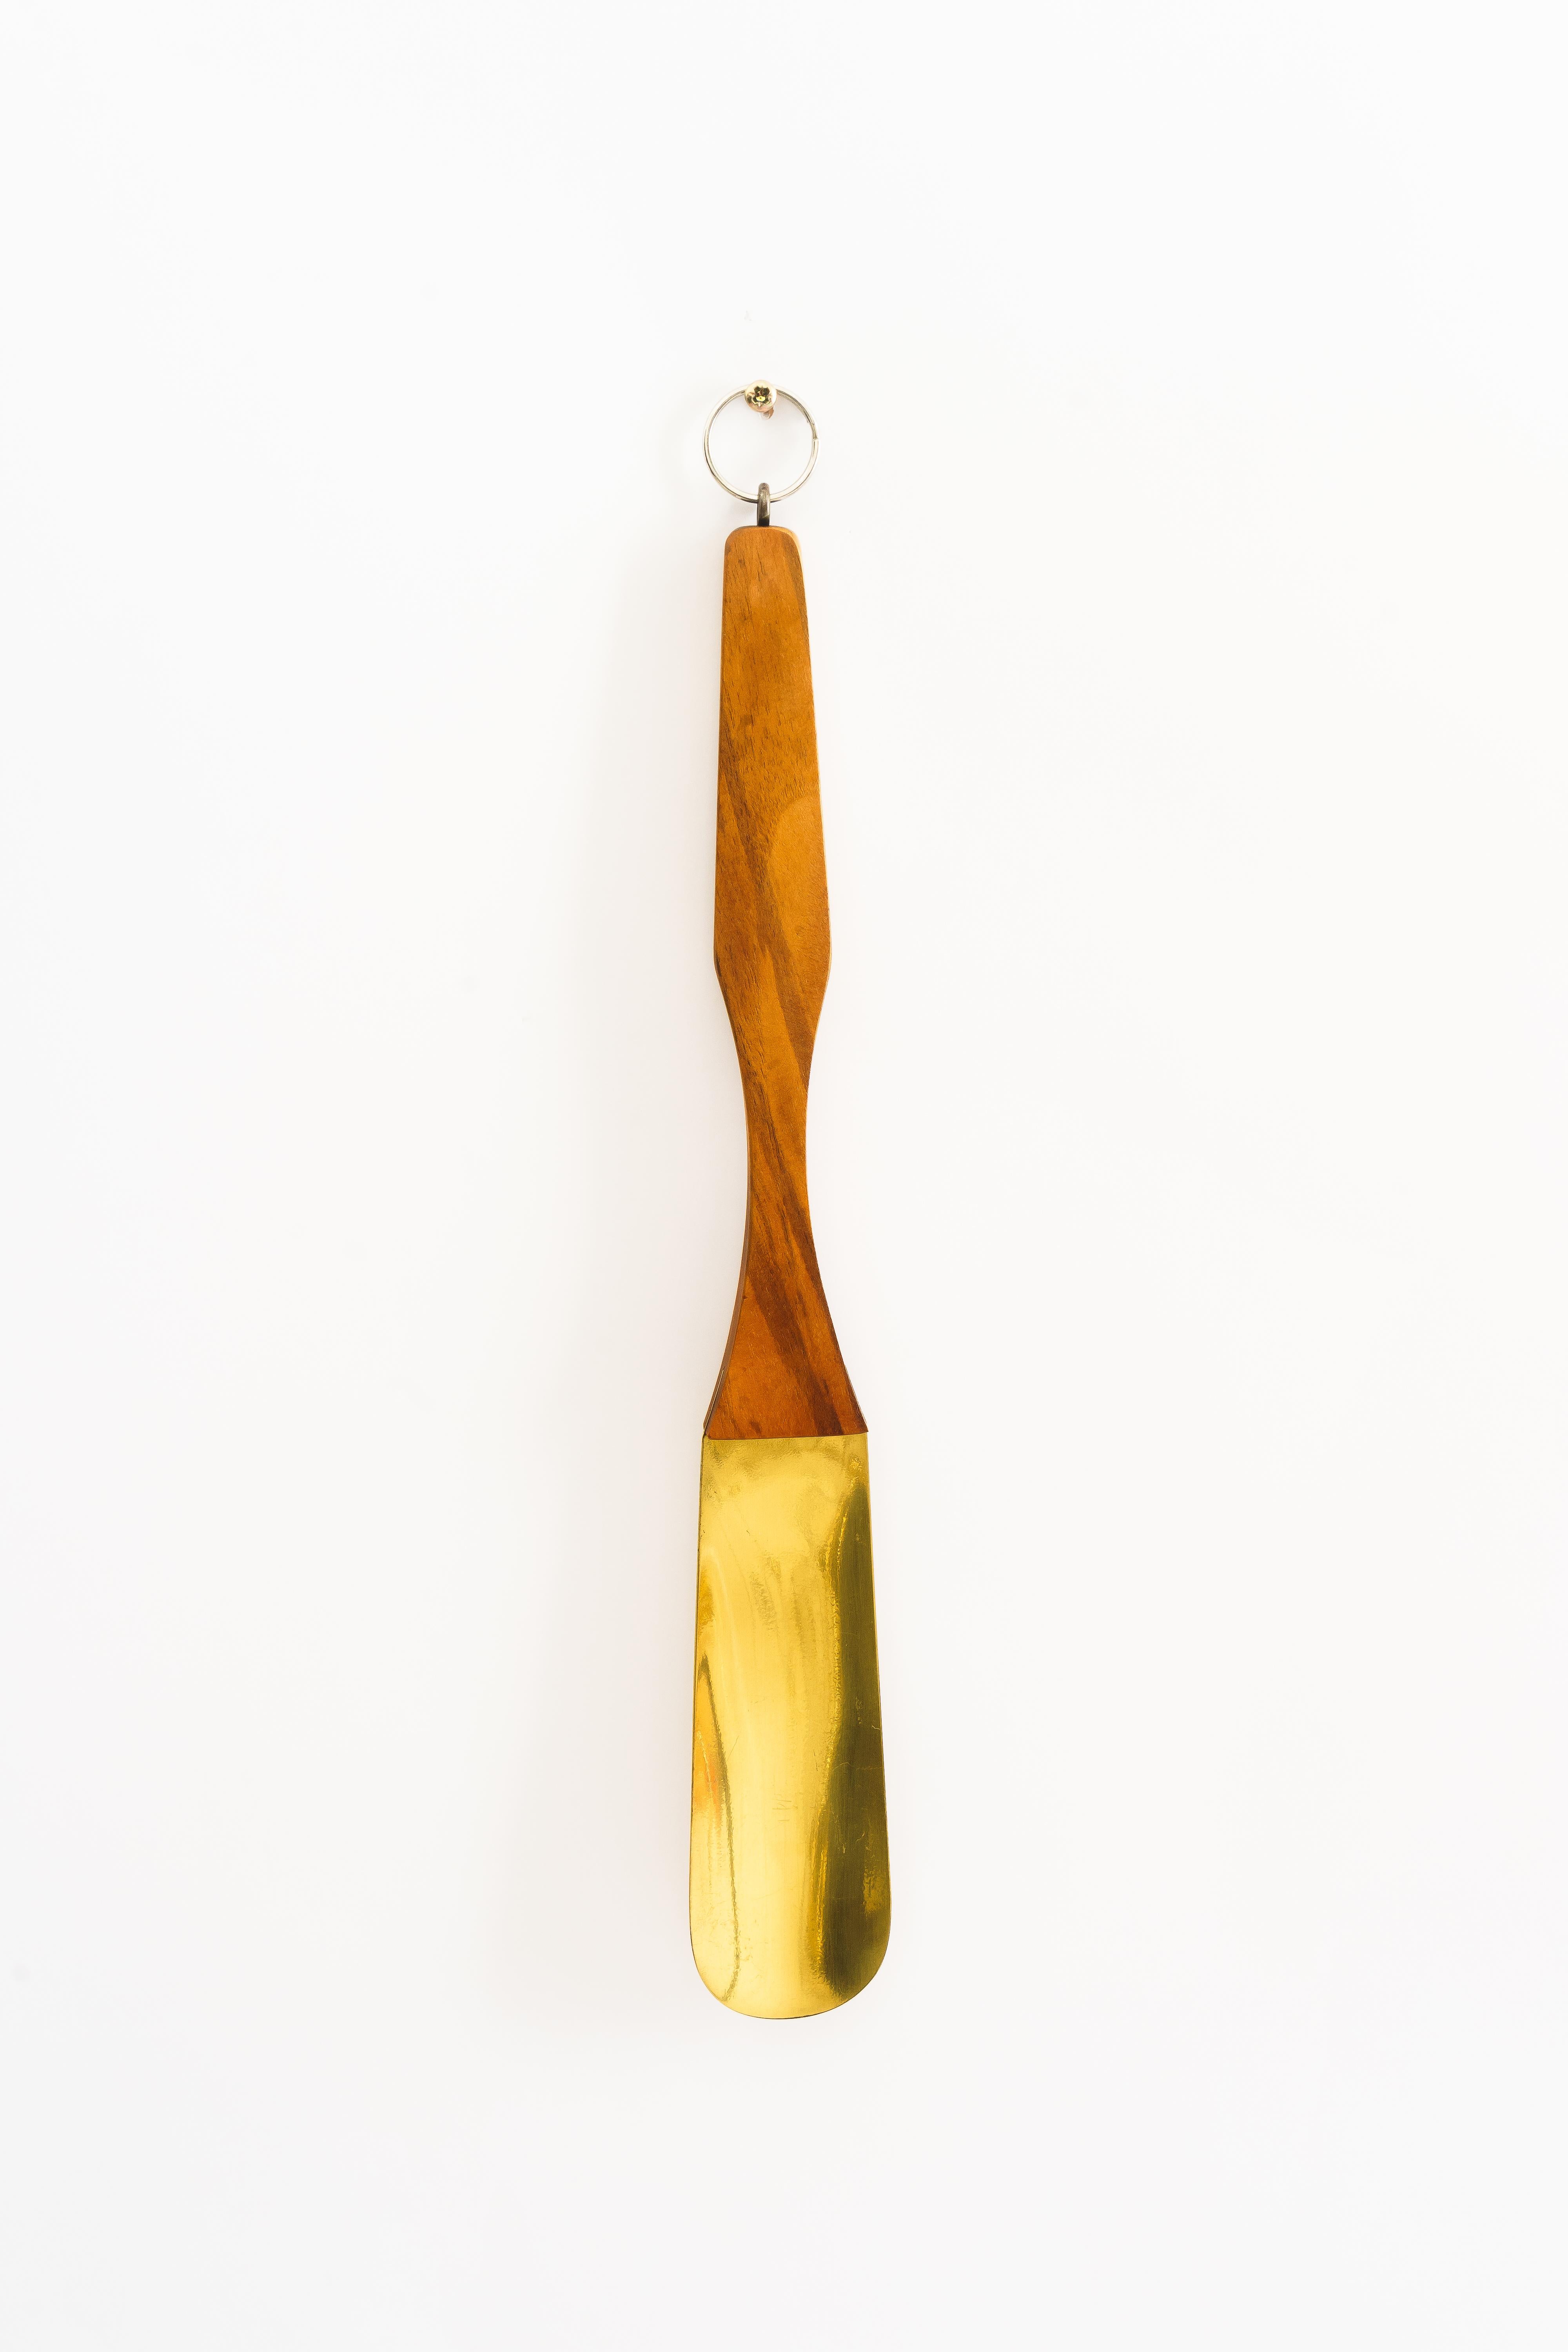 Austrian Shoehorn wood and brass around 1950s For Sale